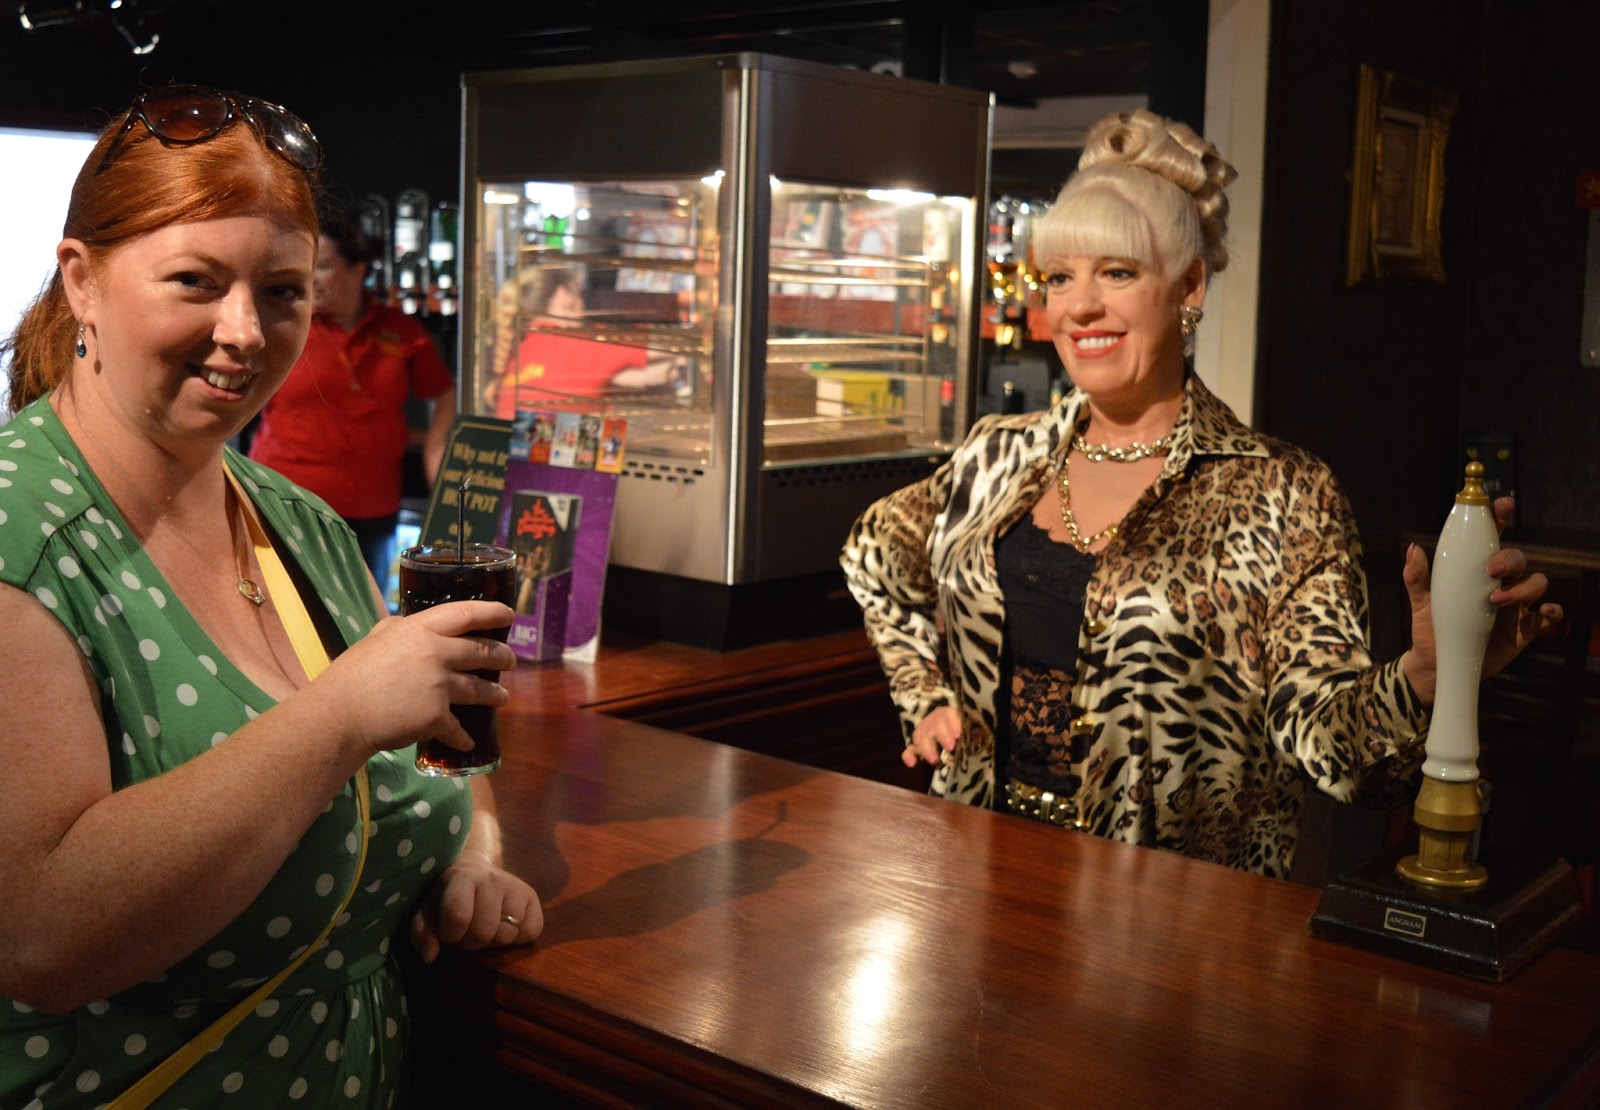 Madame Tussauds Blackpool - A review | North East Family Fun